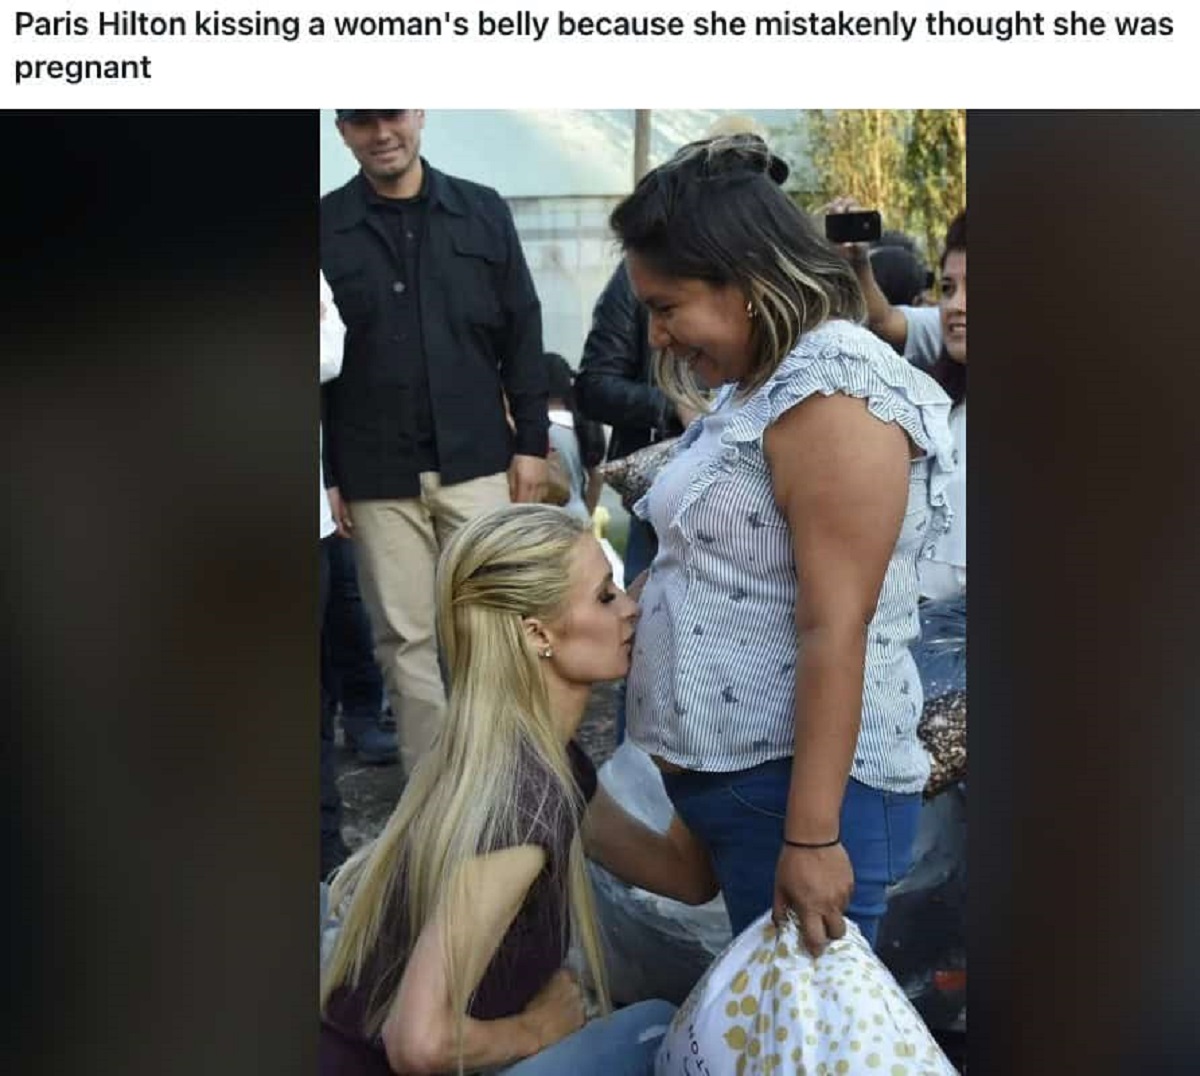 paris hilton kissing belly - Paris Hilton kissing a woman's belly because she mistakenly thought she was pregnant